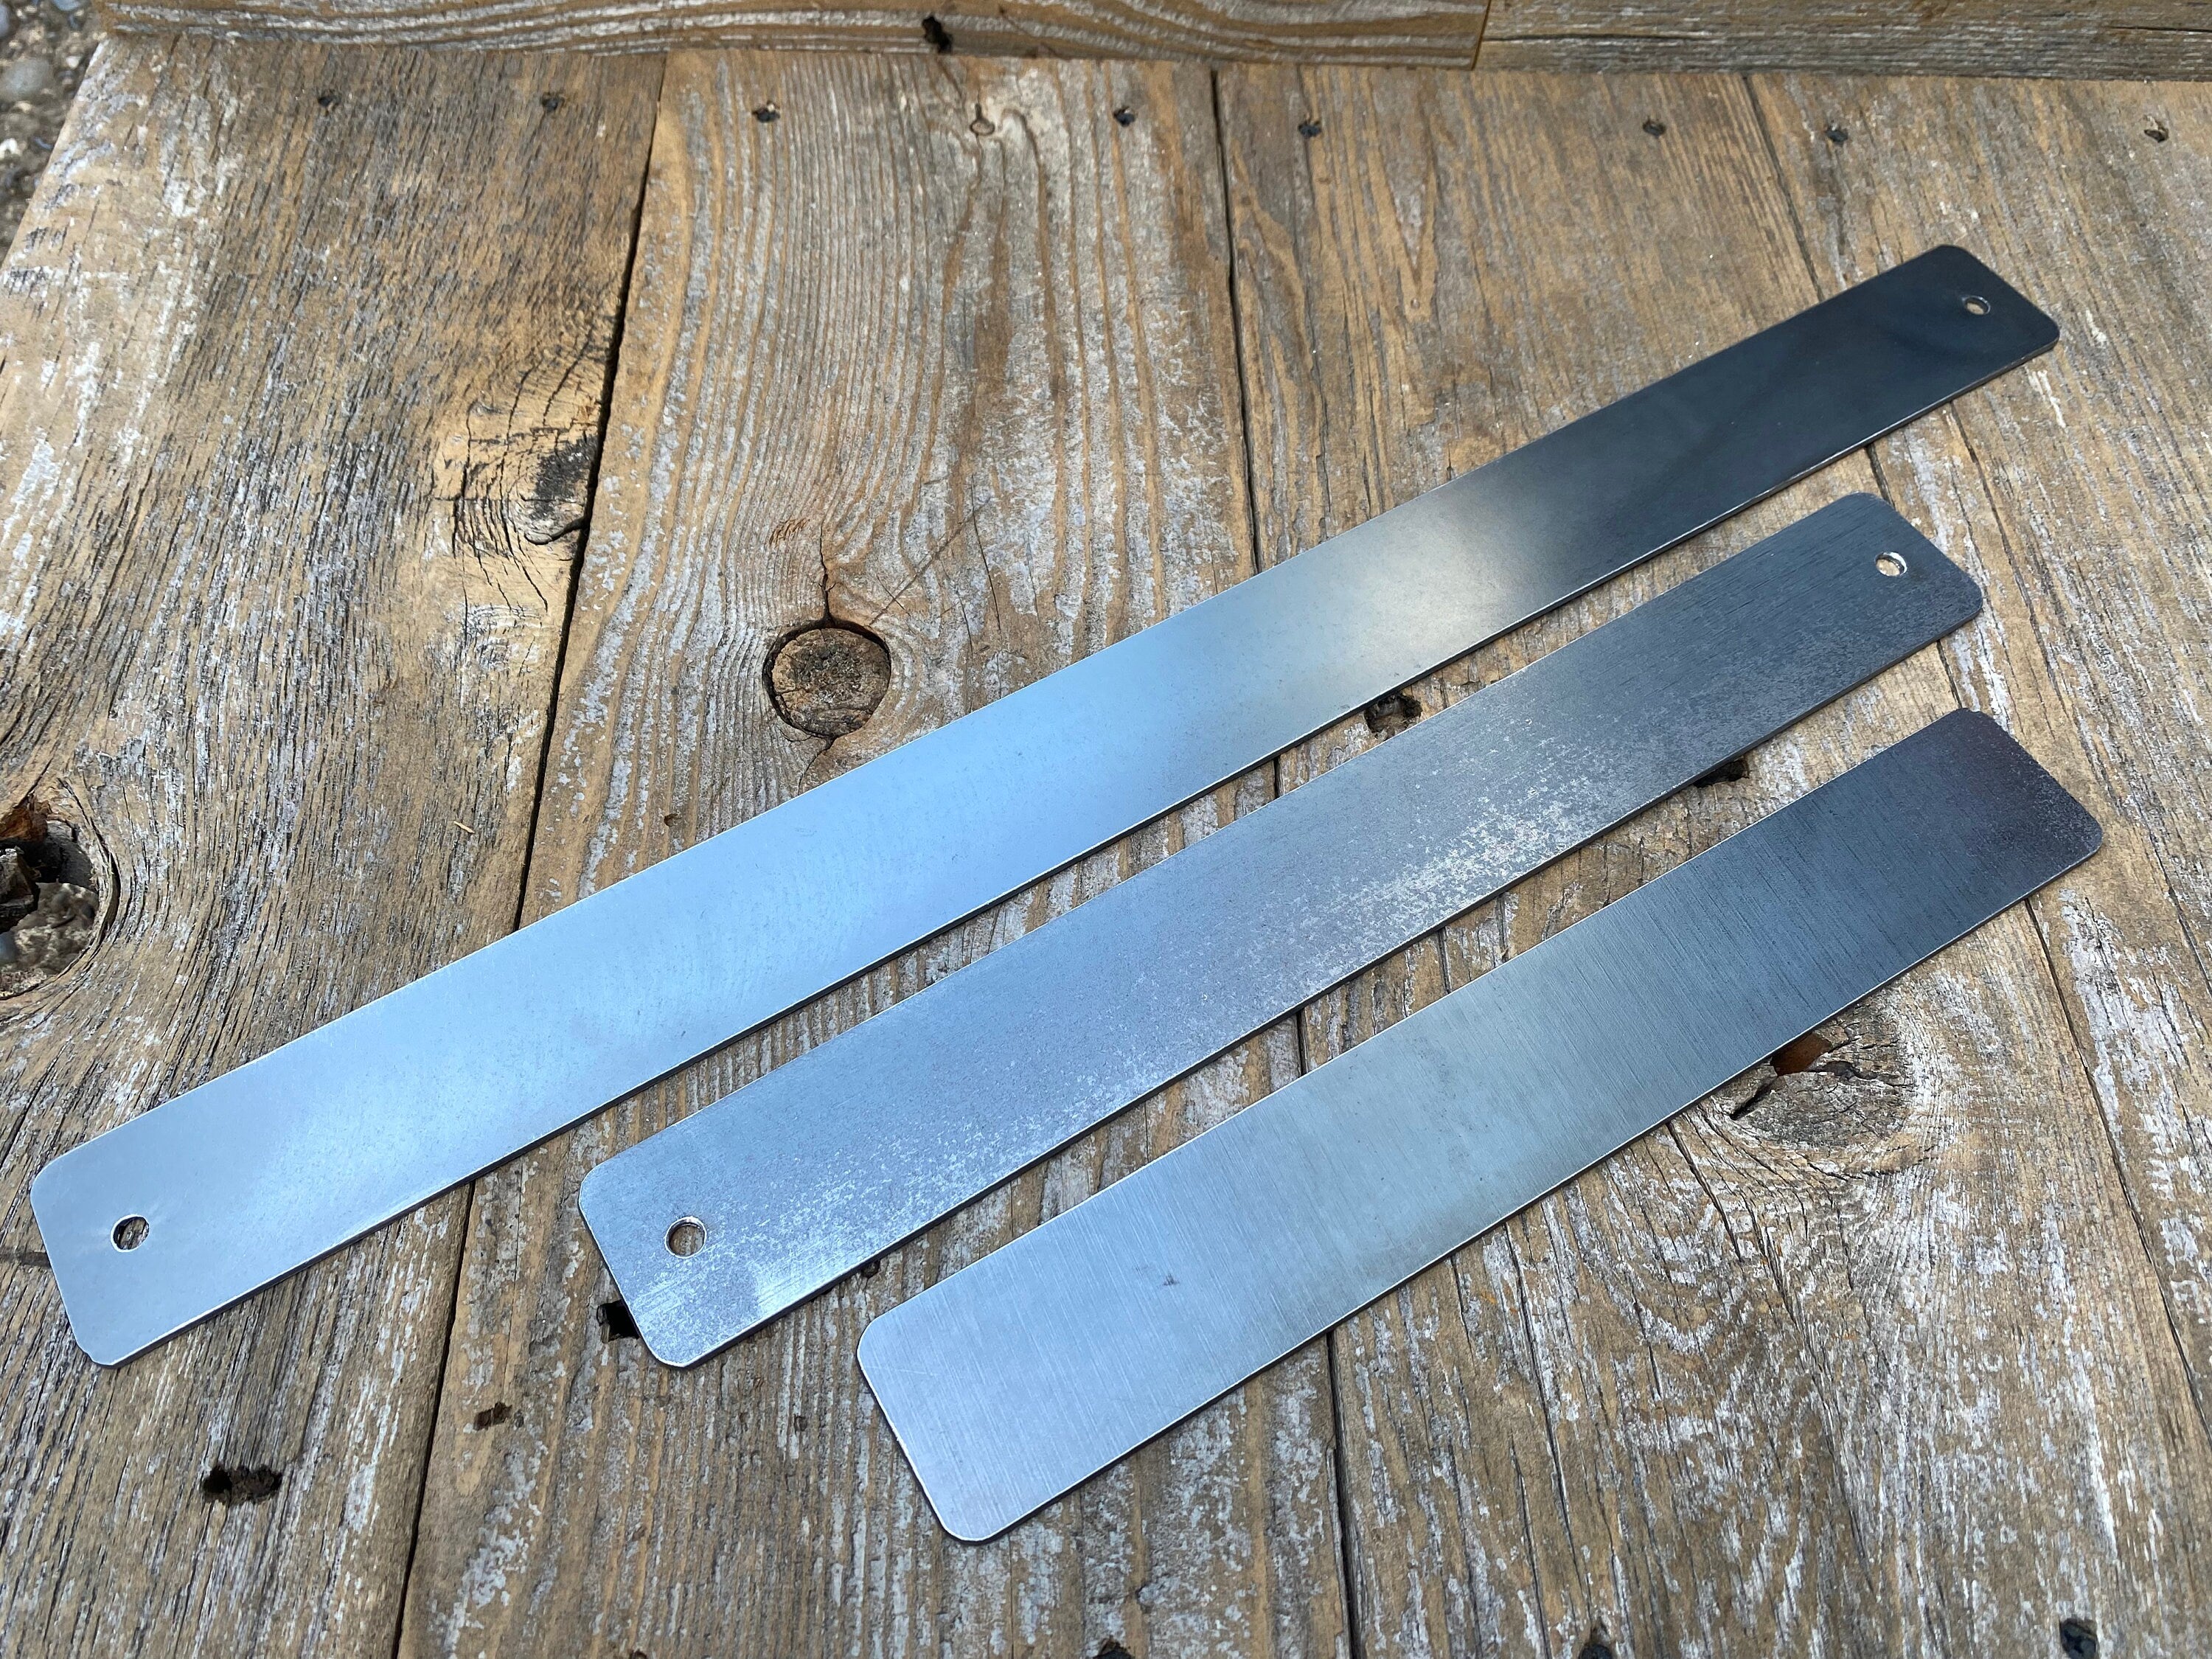 Metal Strip for Magnets, Magnet Board, Home Office Organization